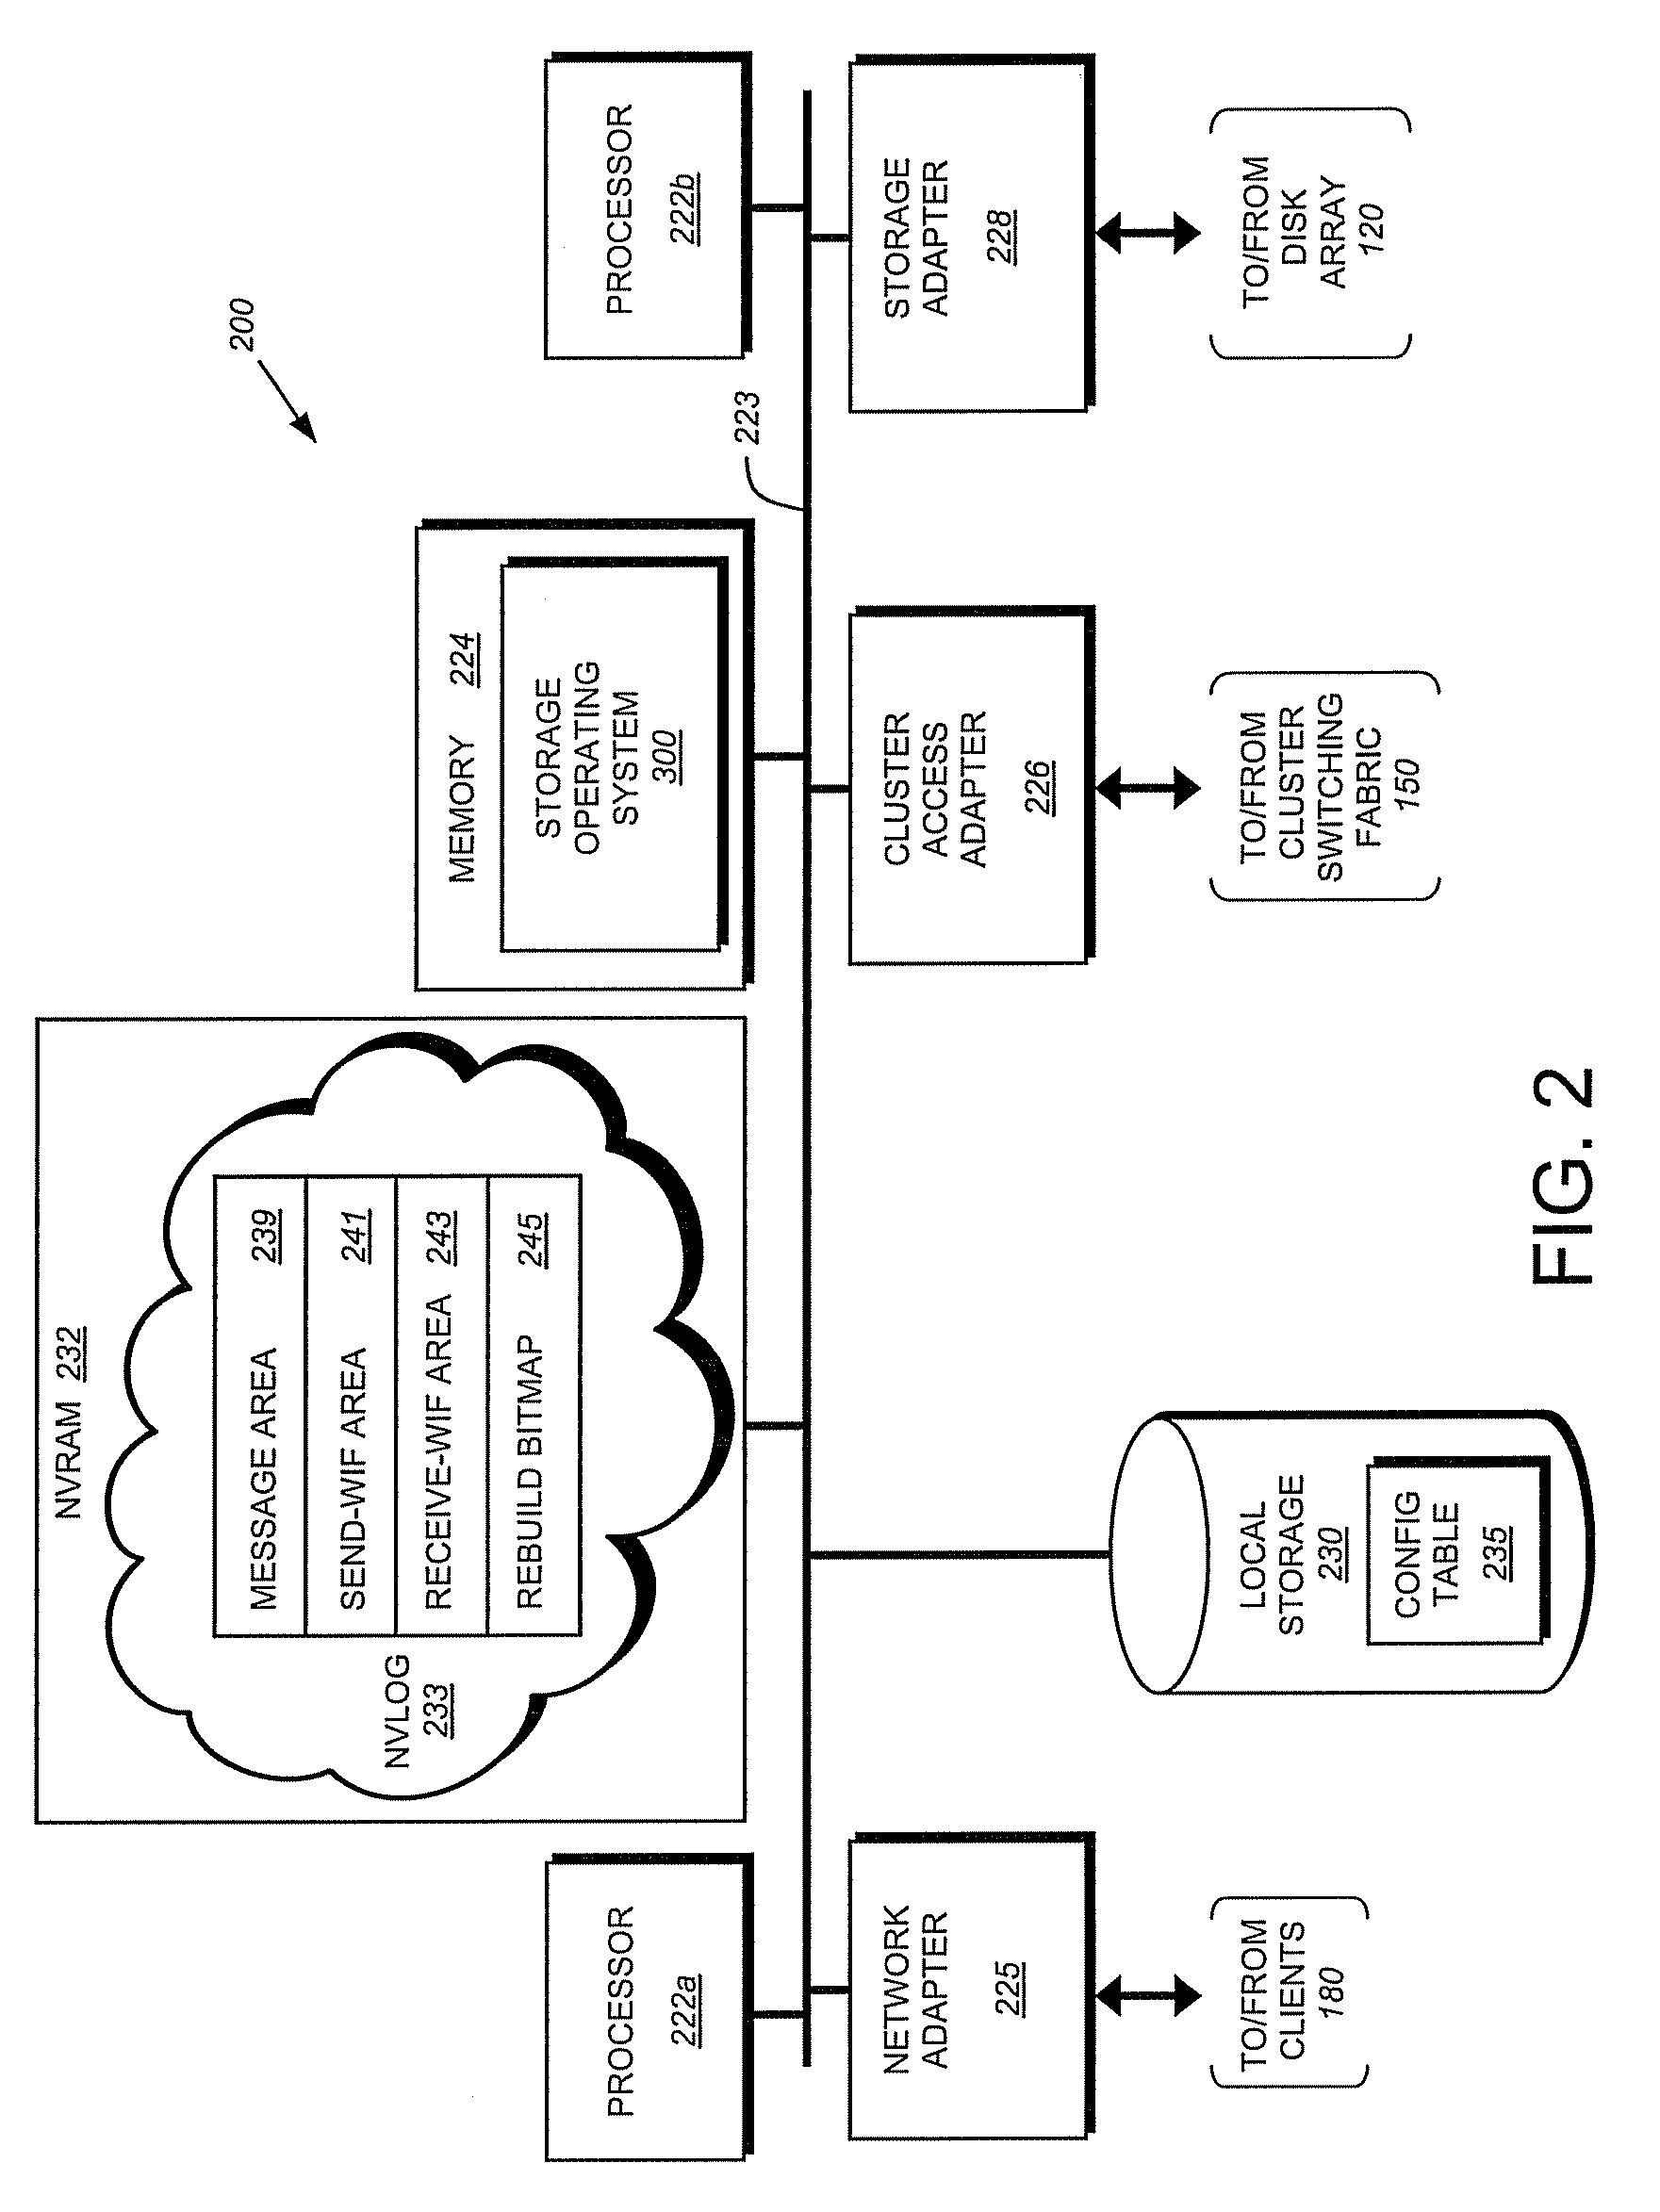 System and method for redundancy-protected aggregates